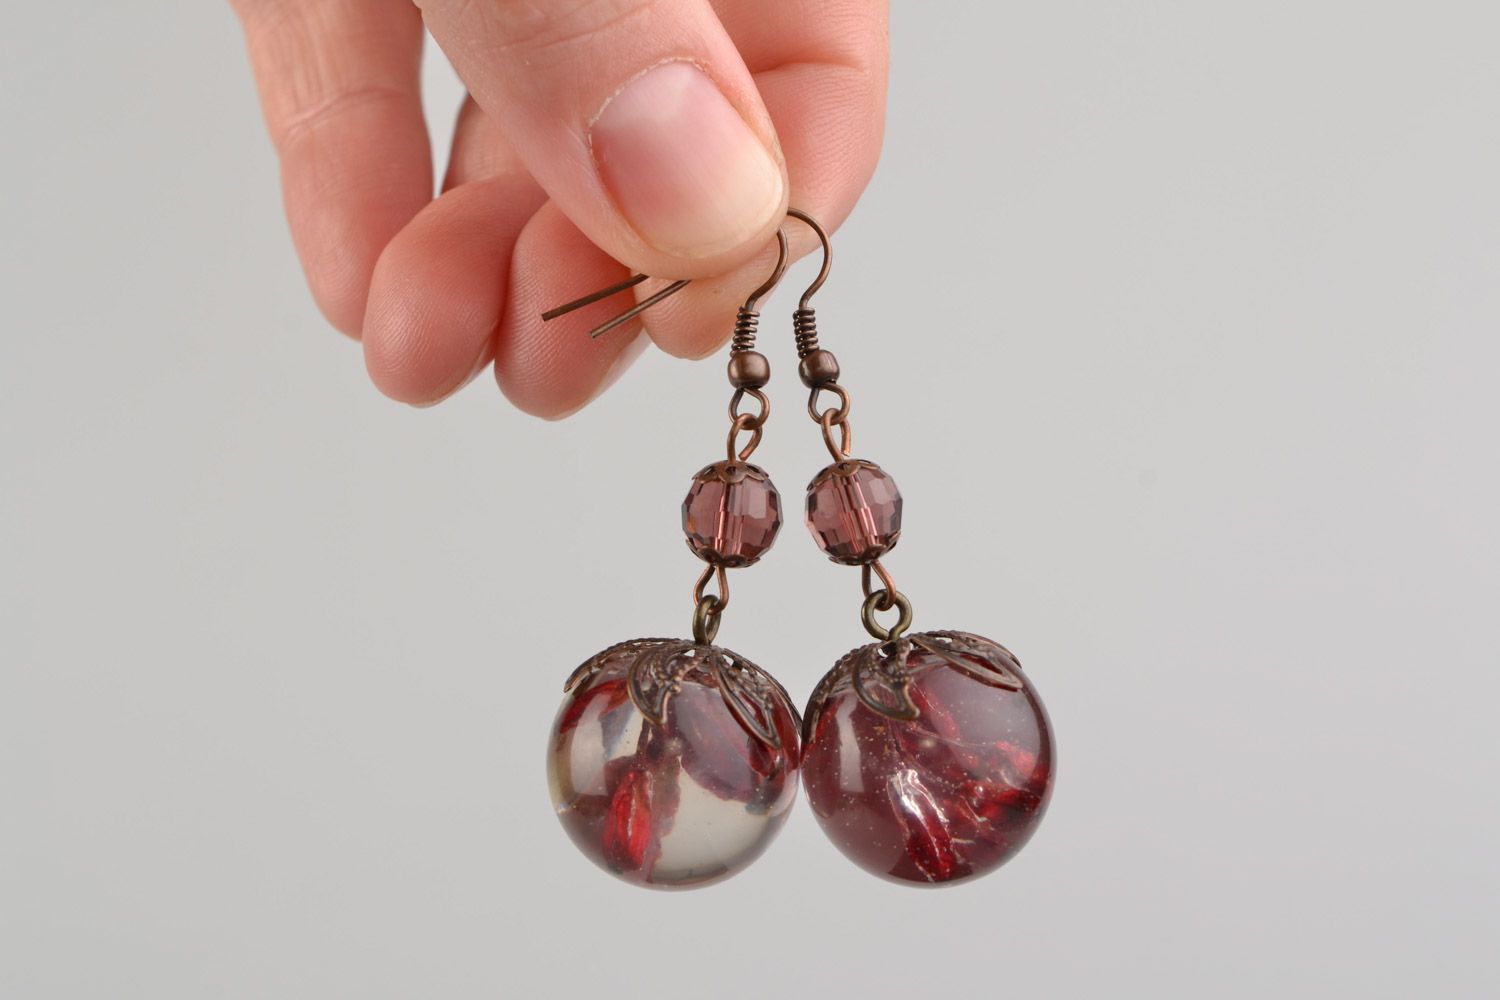 Homemade long ball earrings with barberry coated with epoxy resin photo 2